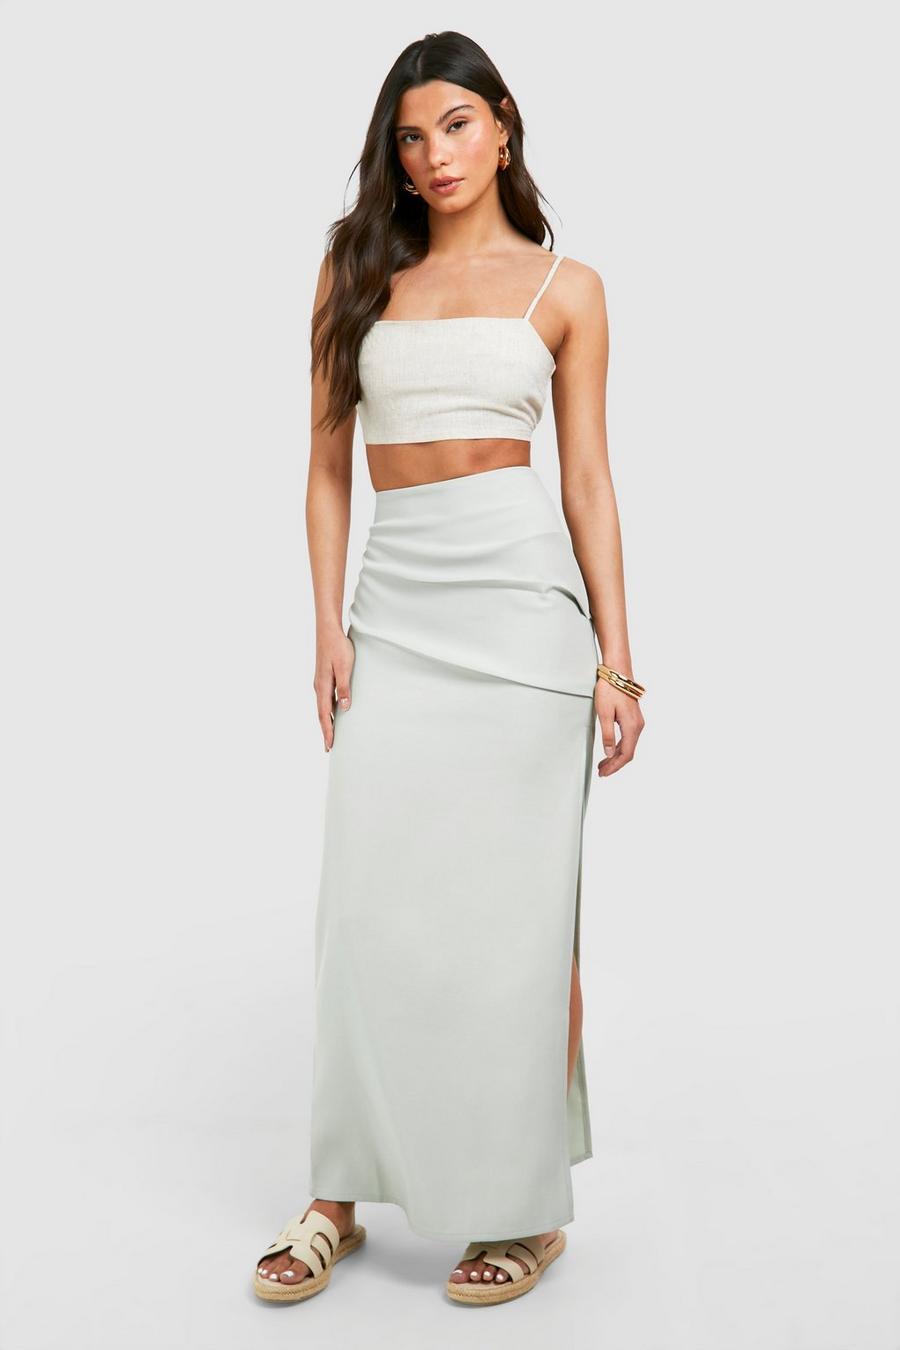 Sage Low Rise Ruched Maxi Skirt